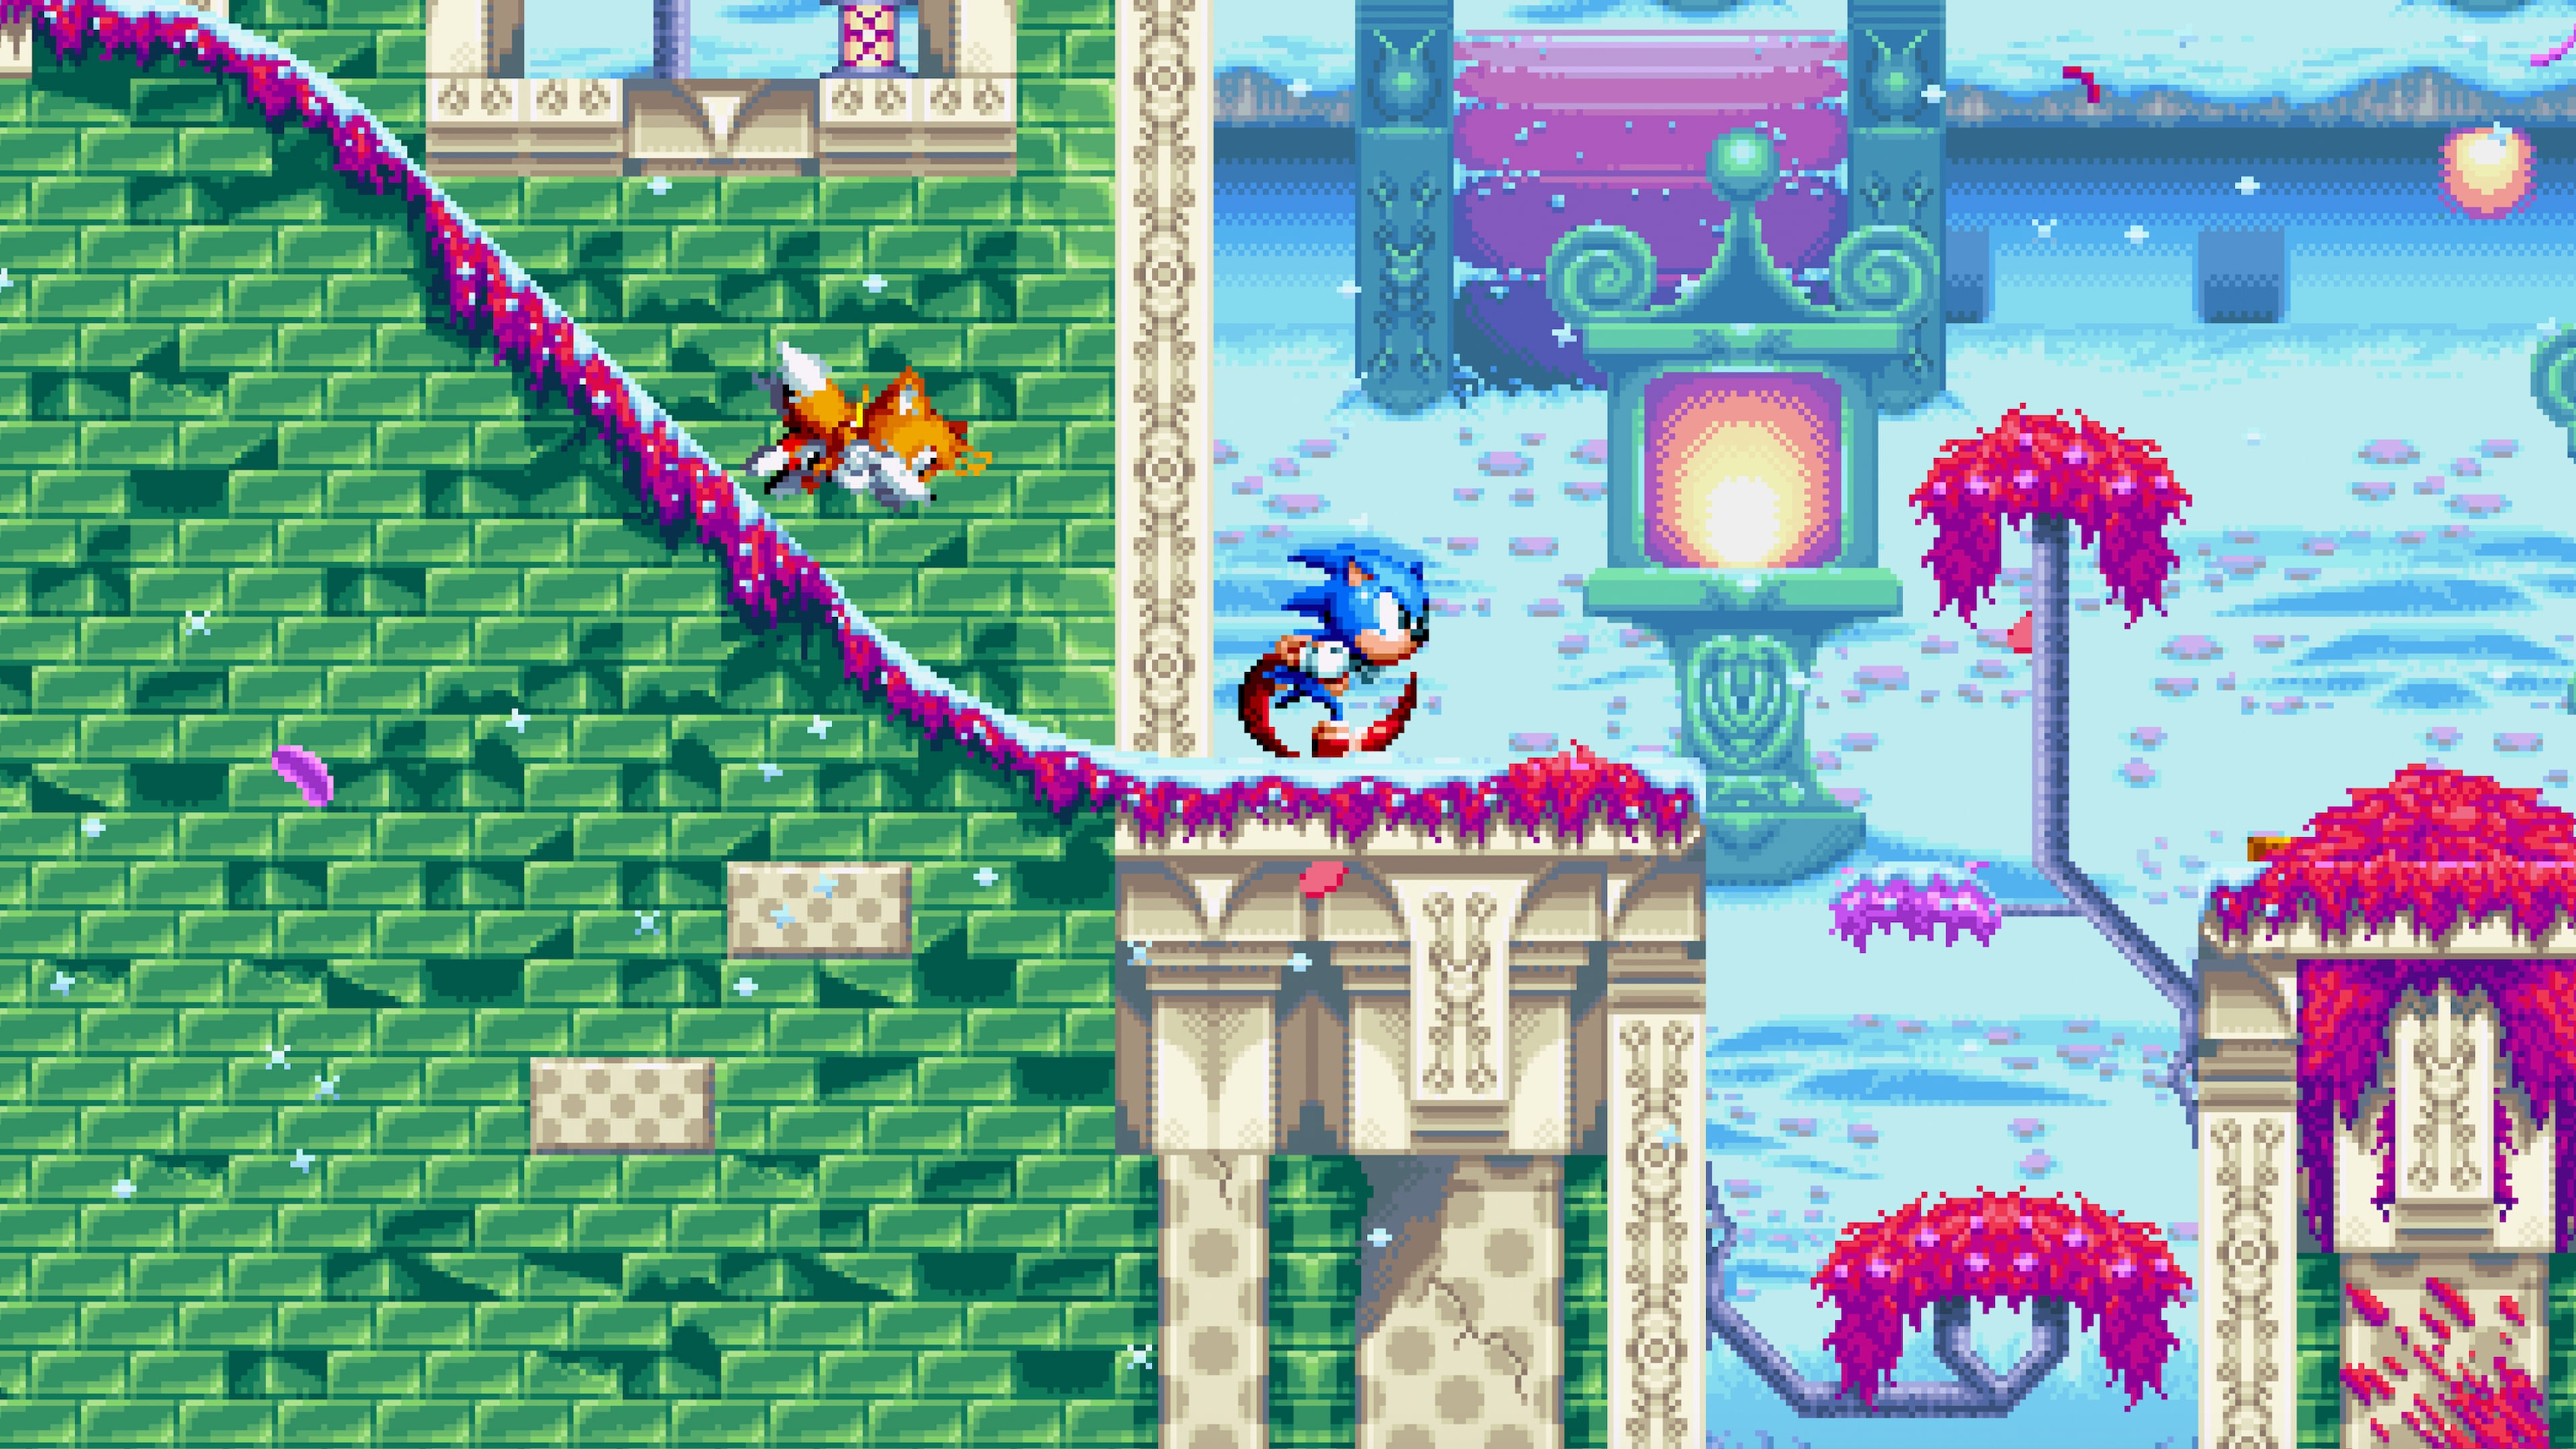 Sonic Mania - Encore DLC at the best price